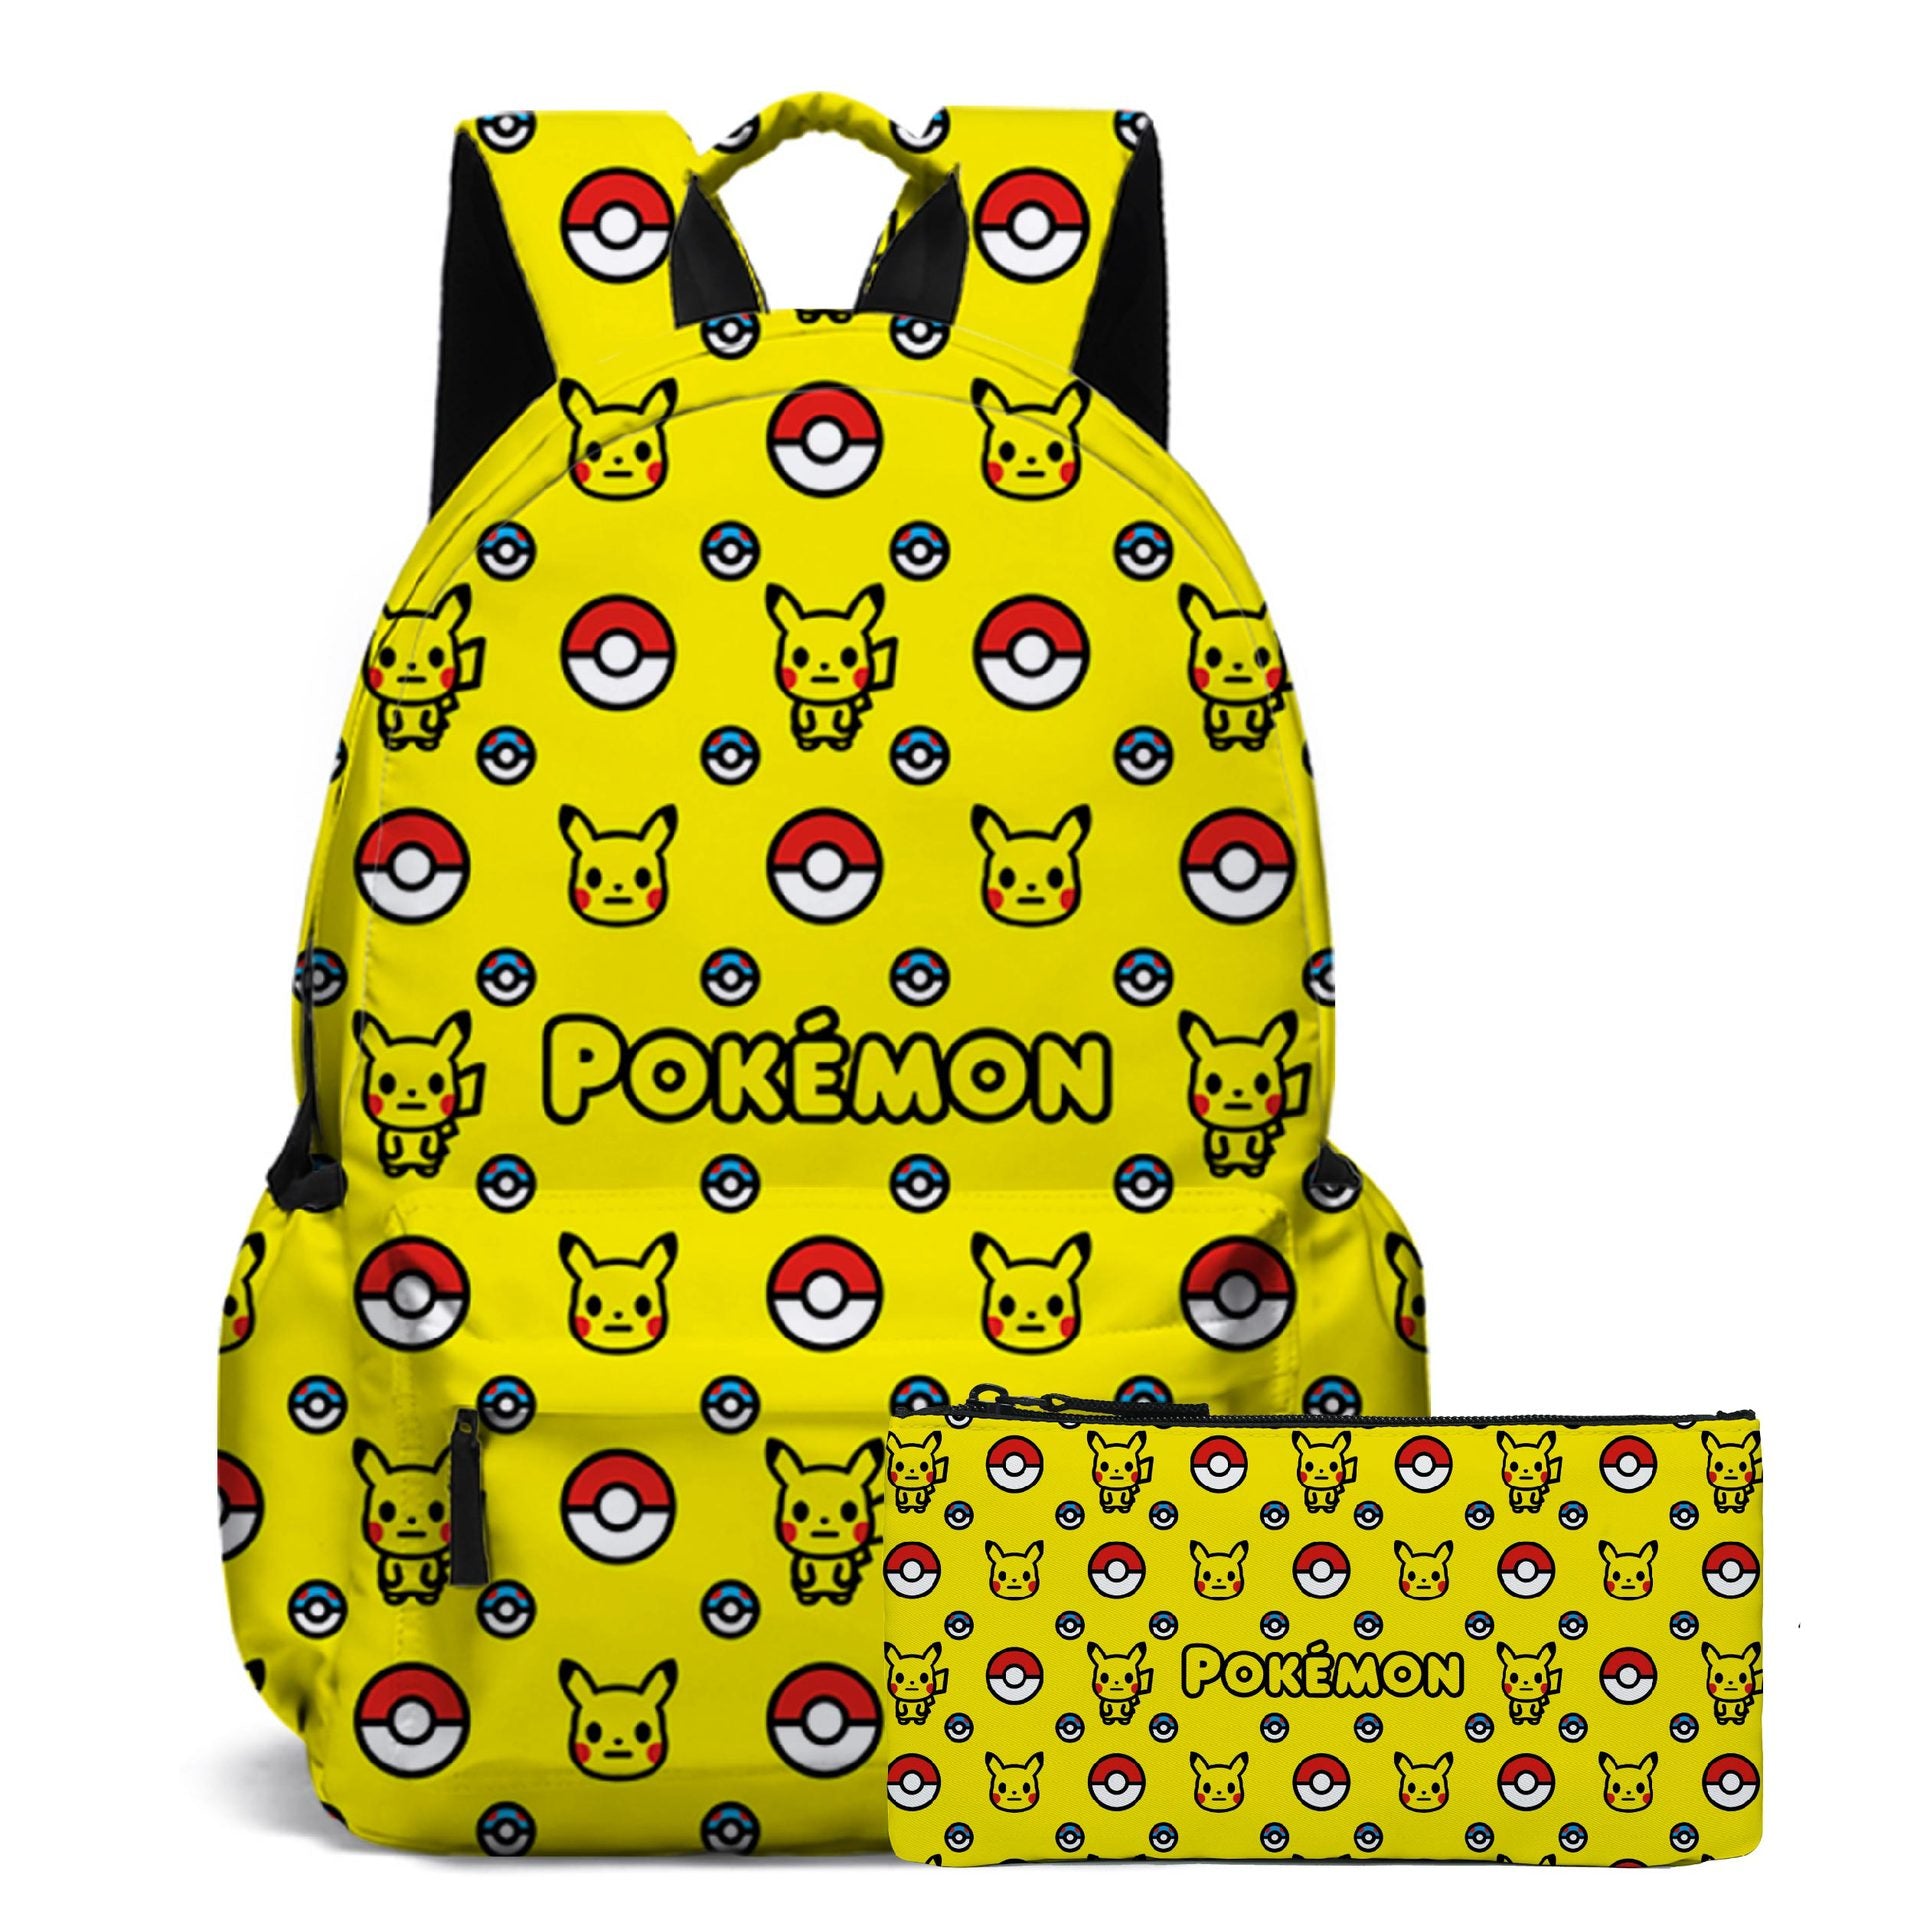 Pokémon’s backpack with free pencil case